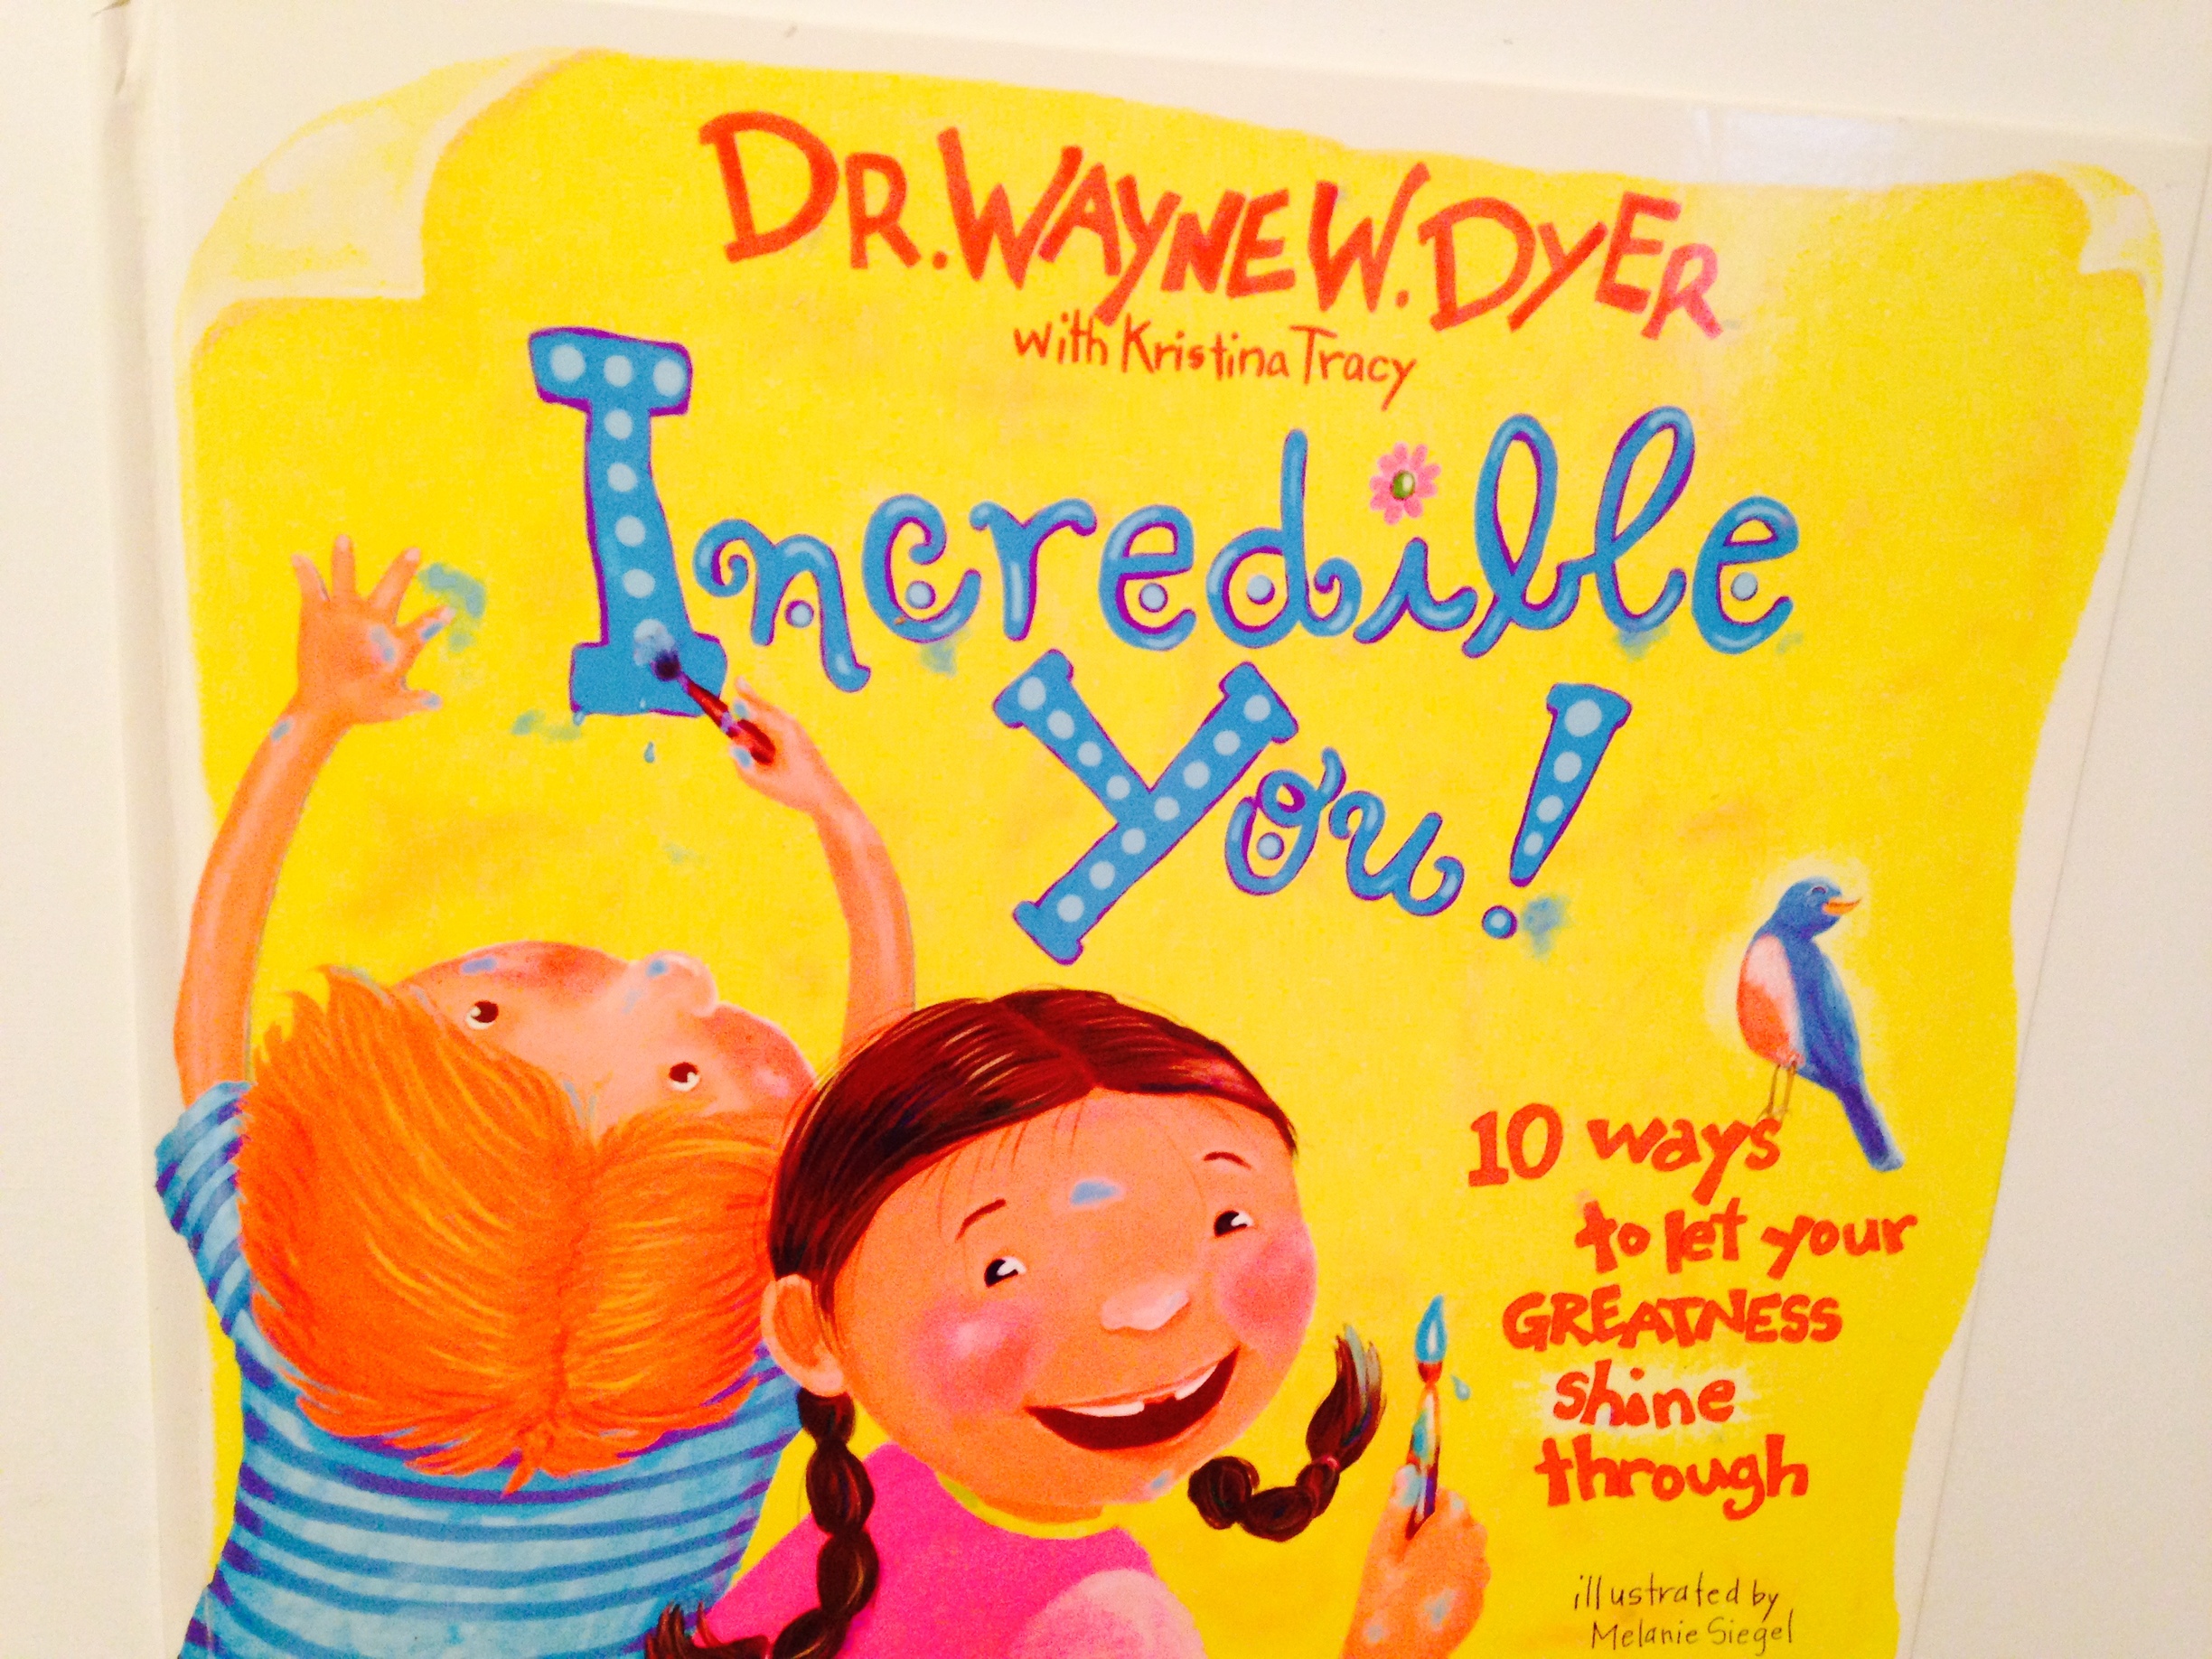 Incredible You! – 10 ways to let your greatness shine through by Dr. Wayne Dyer